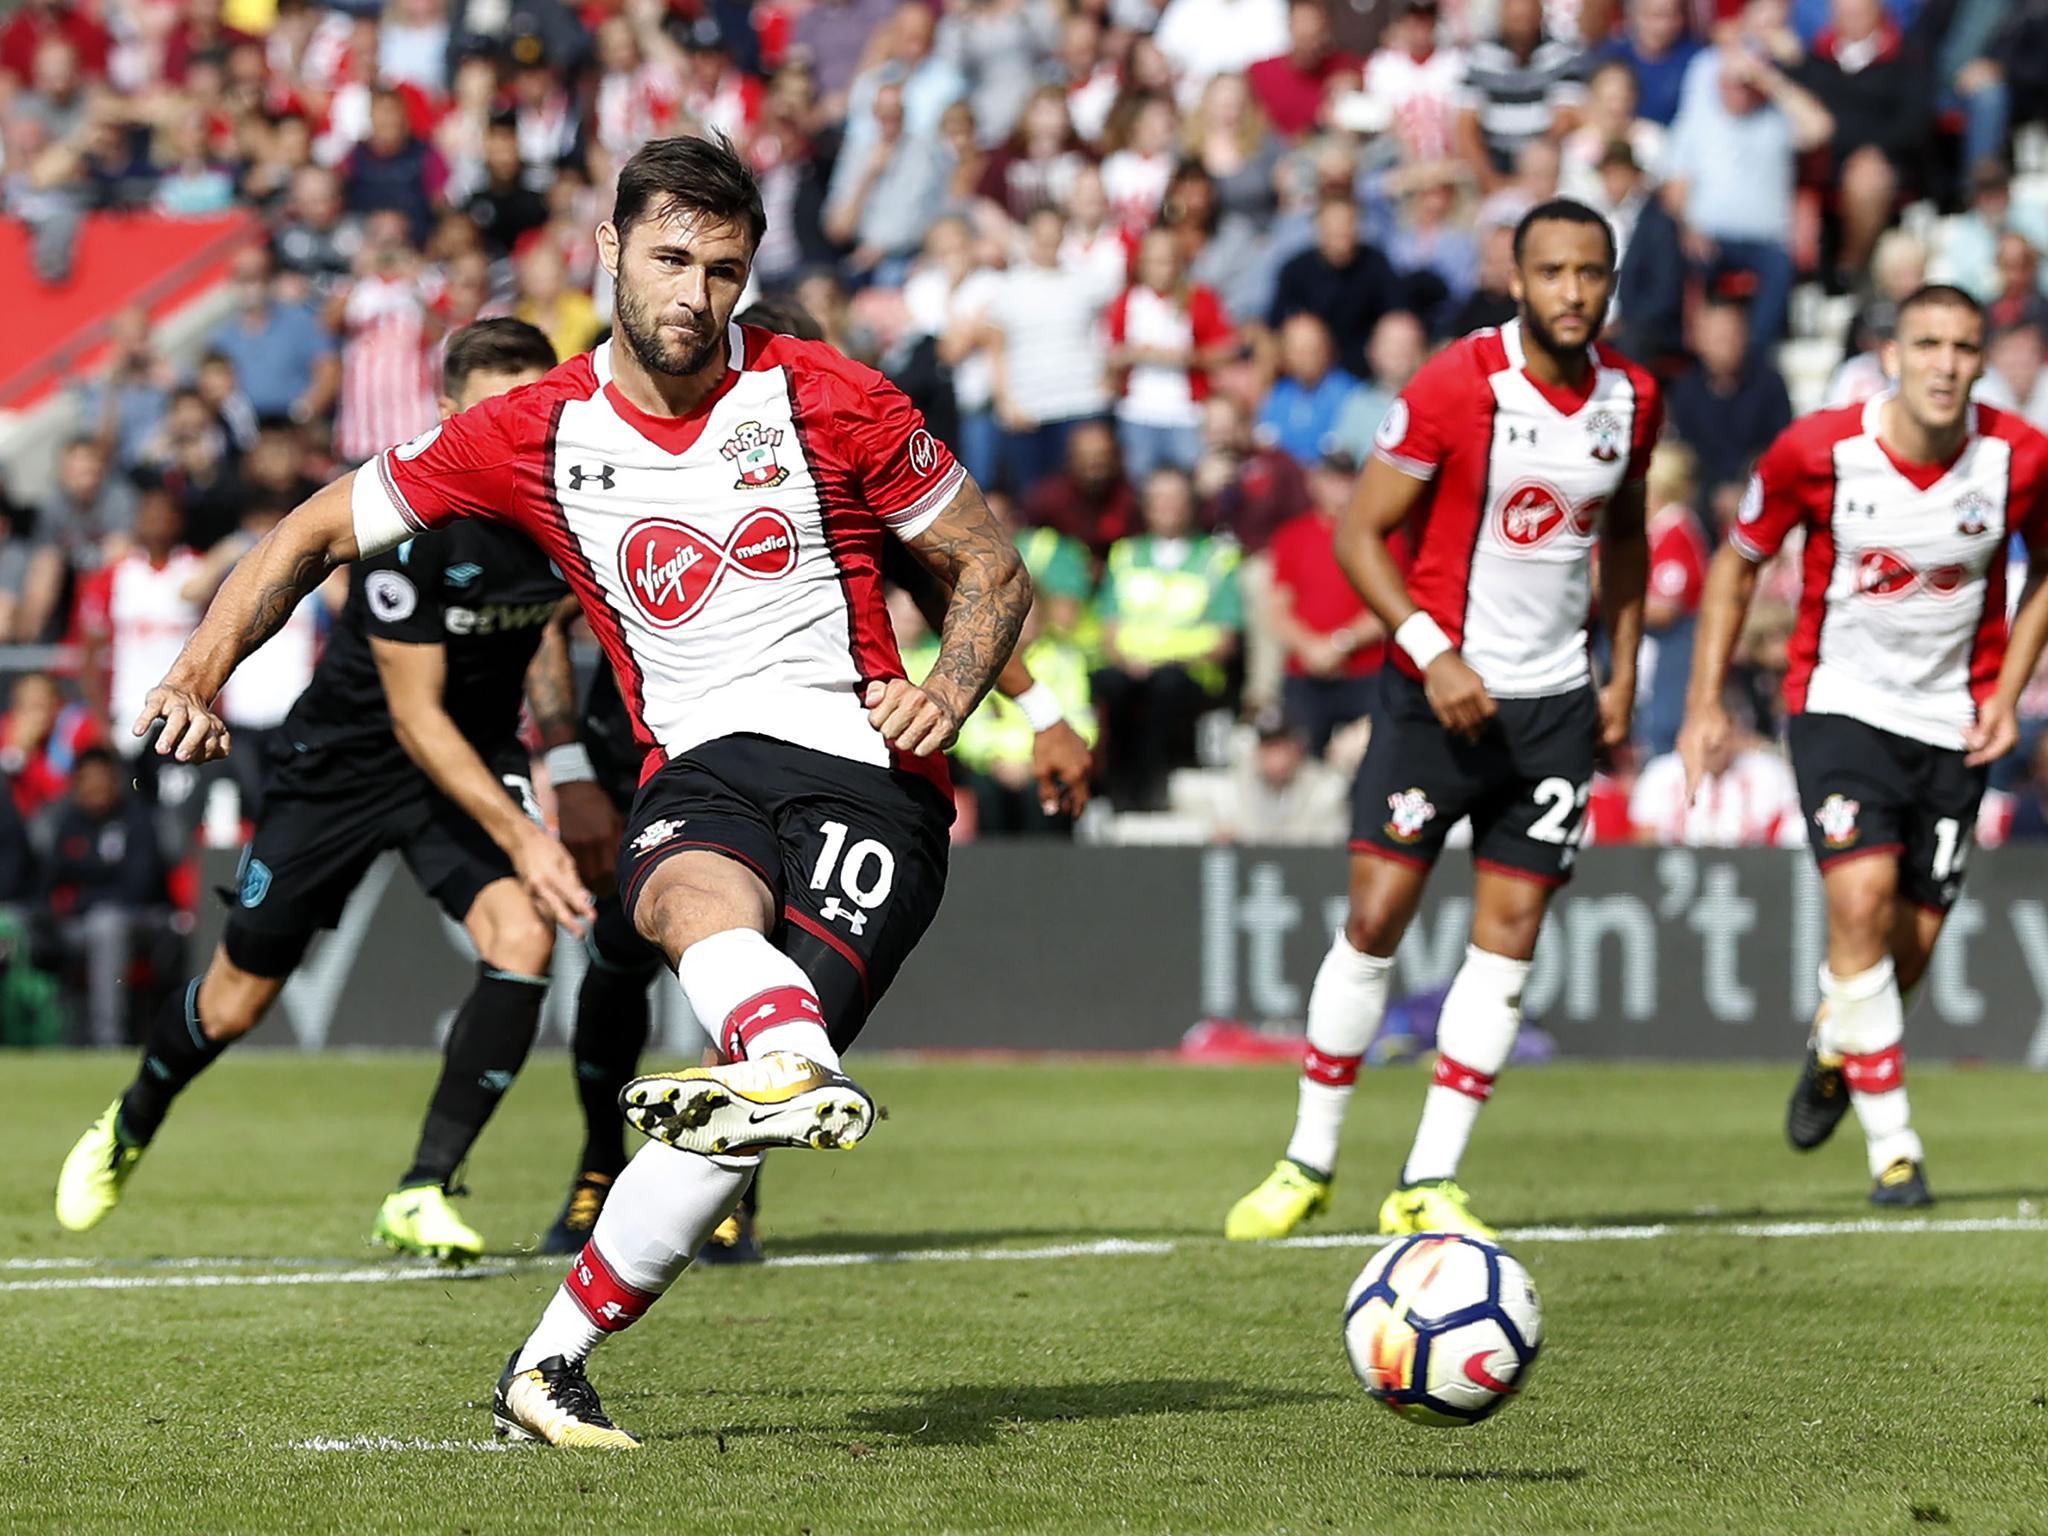 Charlie Austin secures victory for Southampton from the penalty spot against West Ham